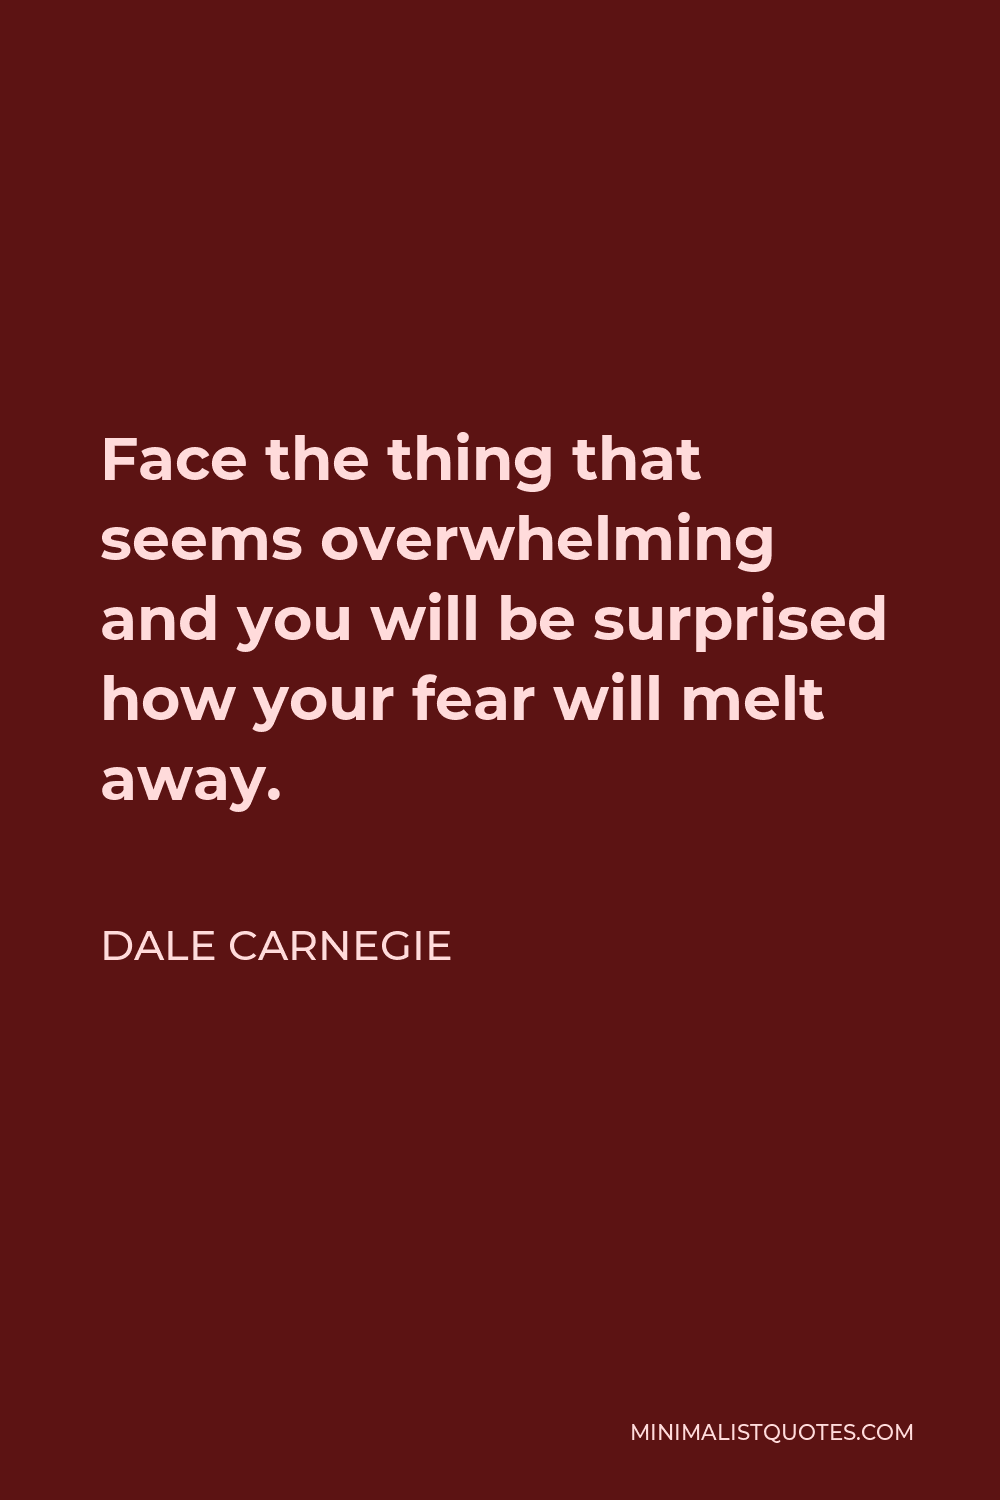 Dale Carnegie Quote - Face the thing that seems overwhelming and you will be surprised how your fear will melt away.